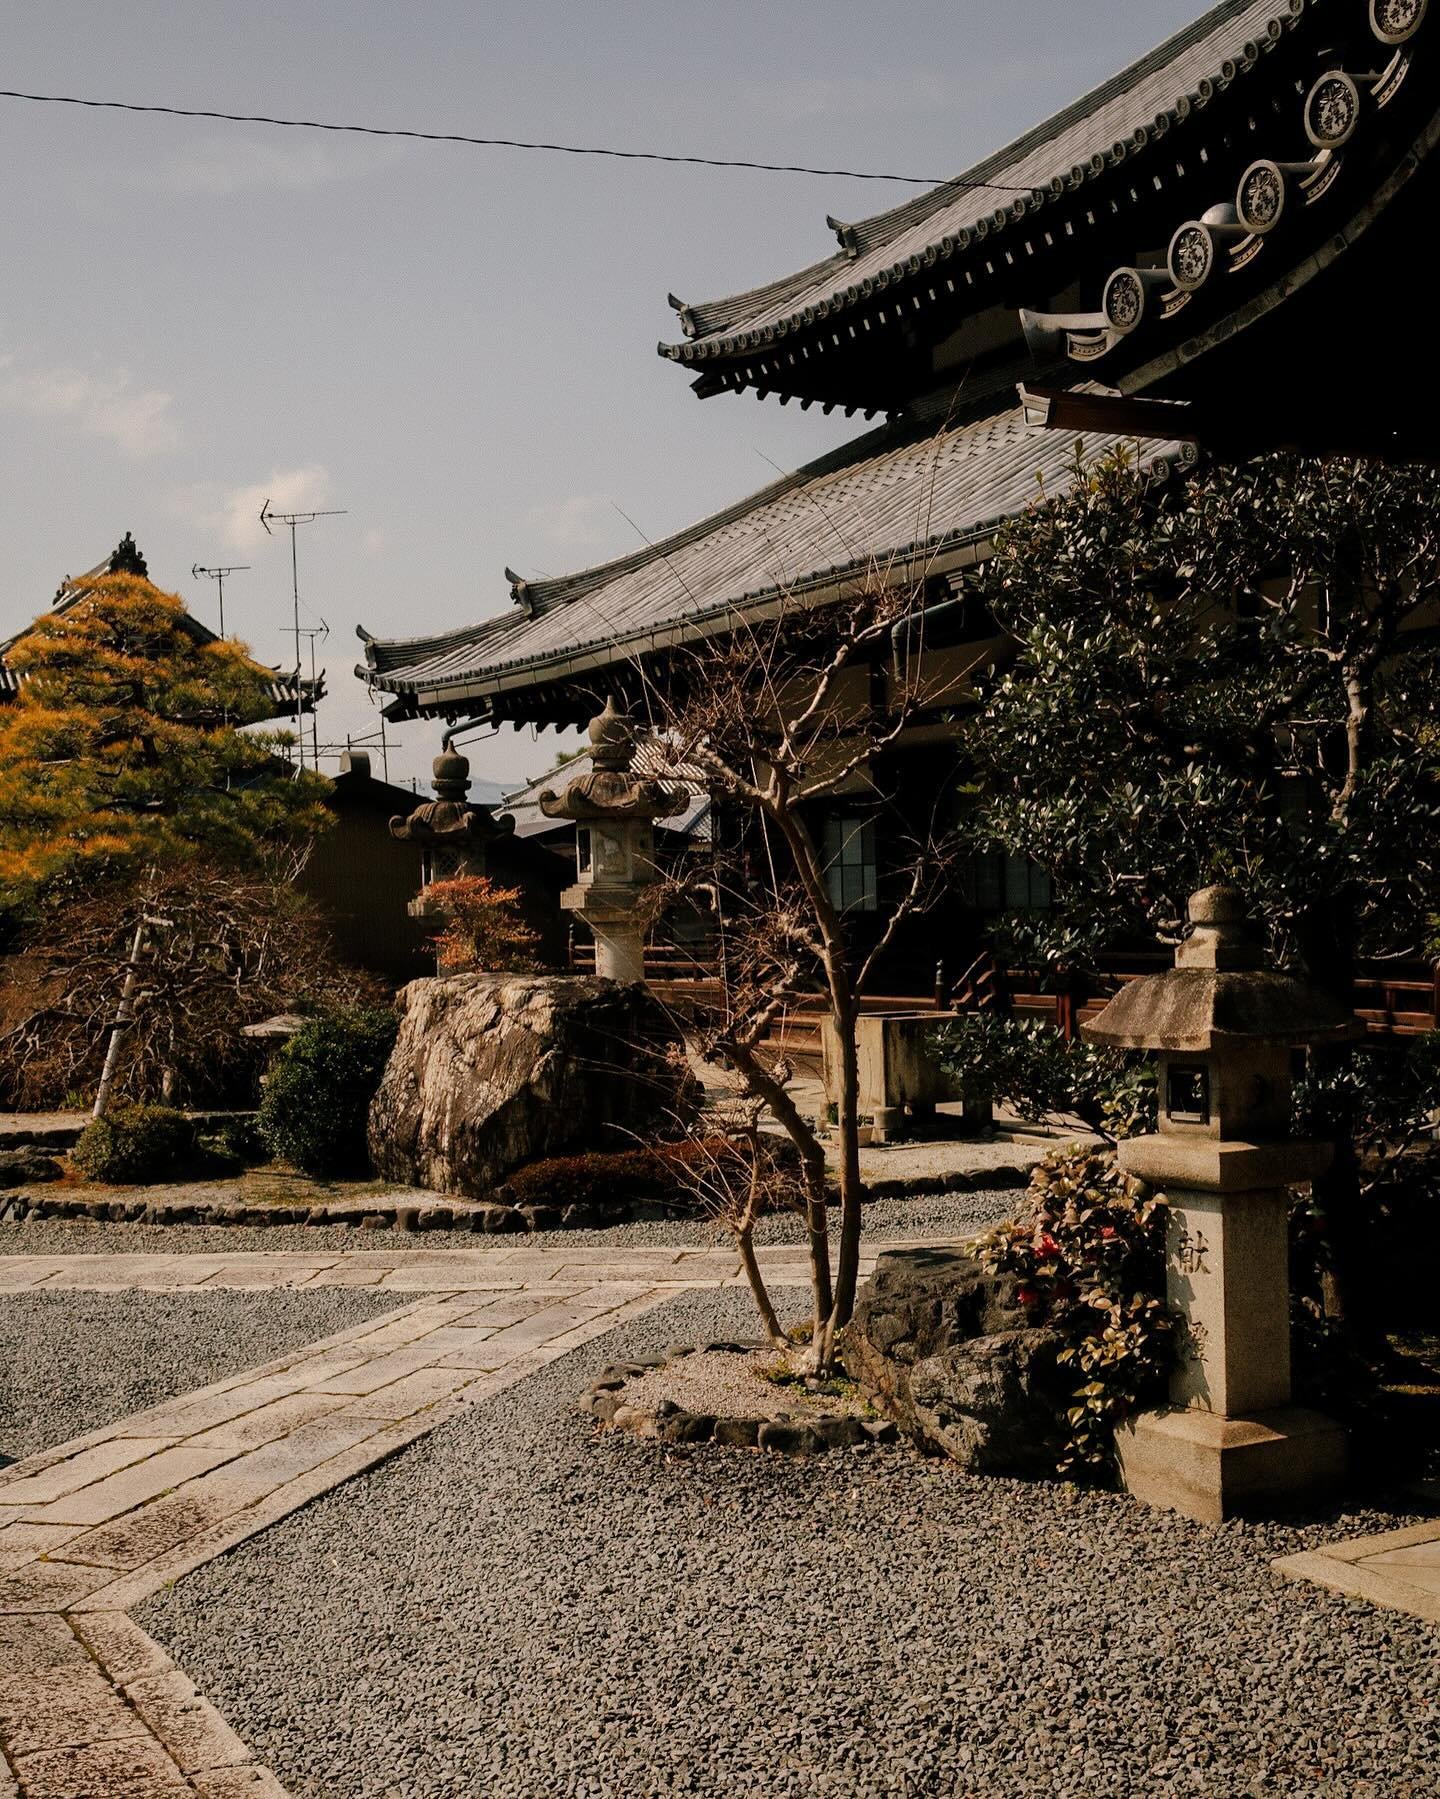 Take me back to Kyoto ~ these are from March 2020, when my trip got cut short. Have been thinking of going back ever since.

~

#japan #visitkyoto #kyoto #travelphotography